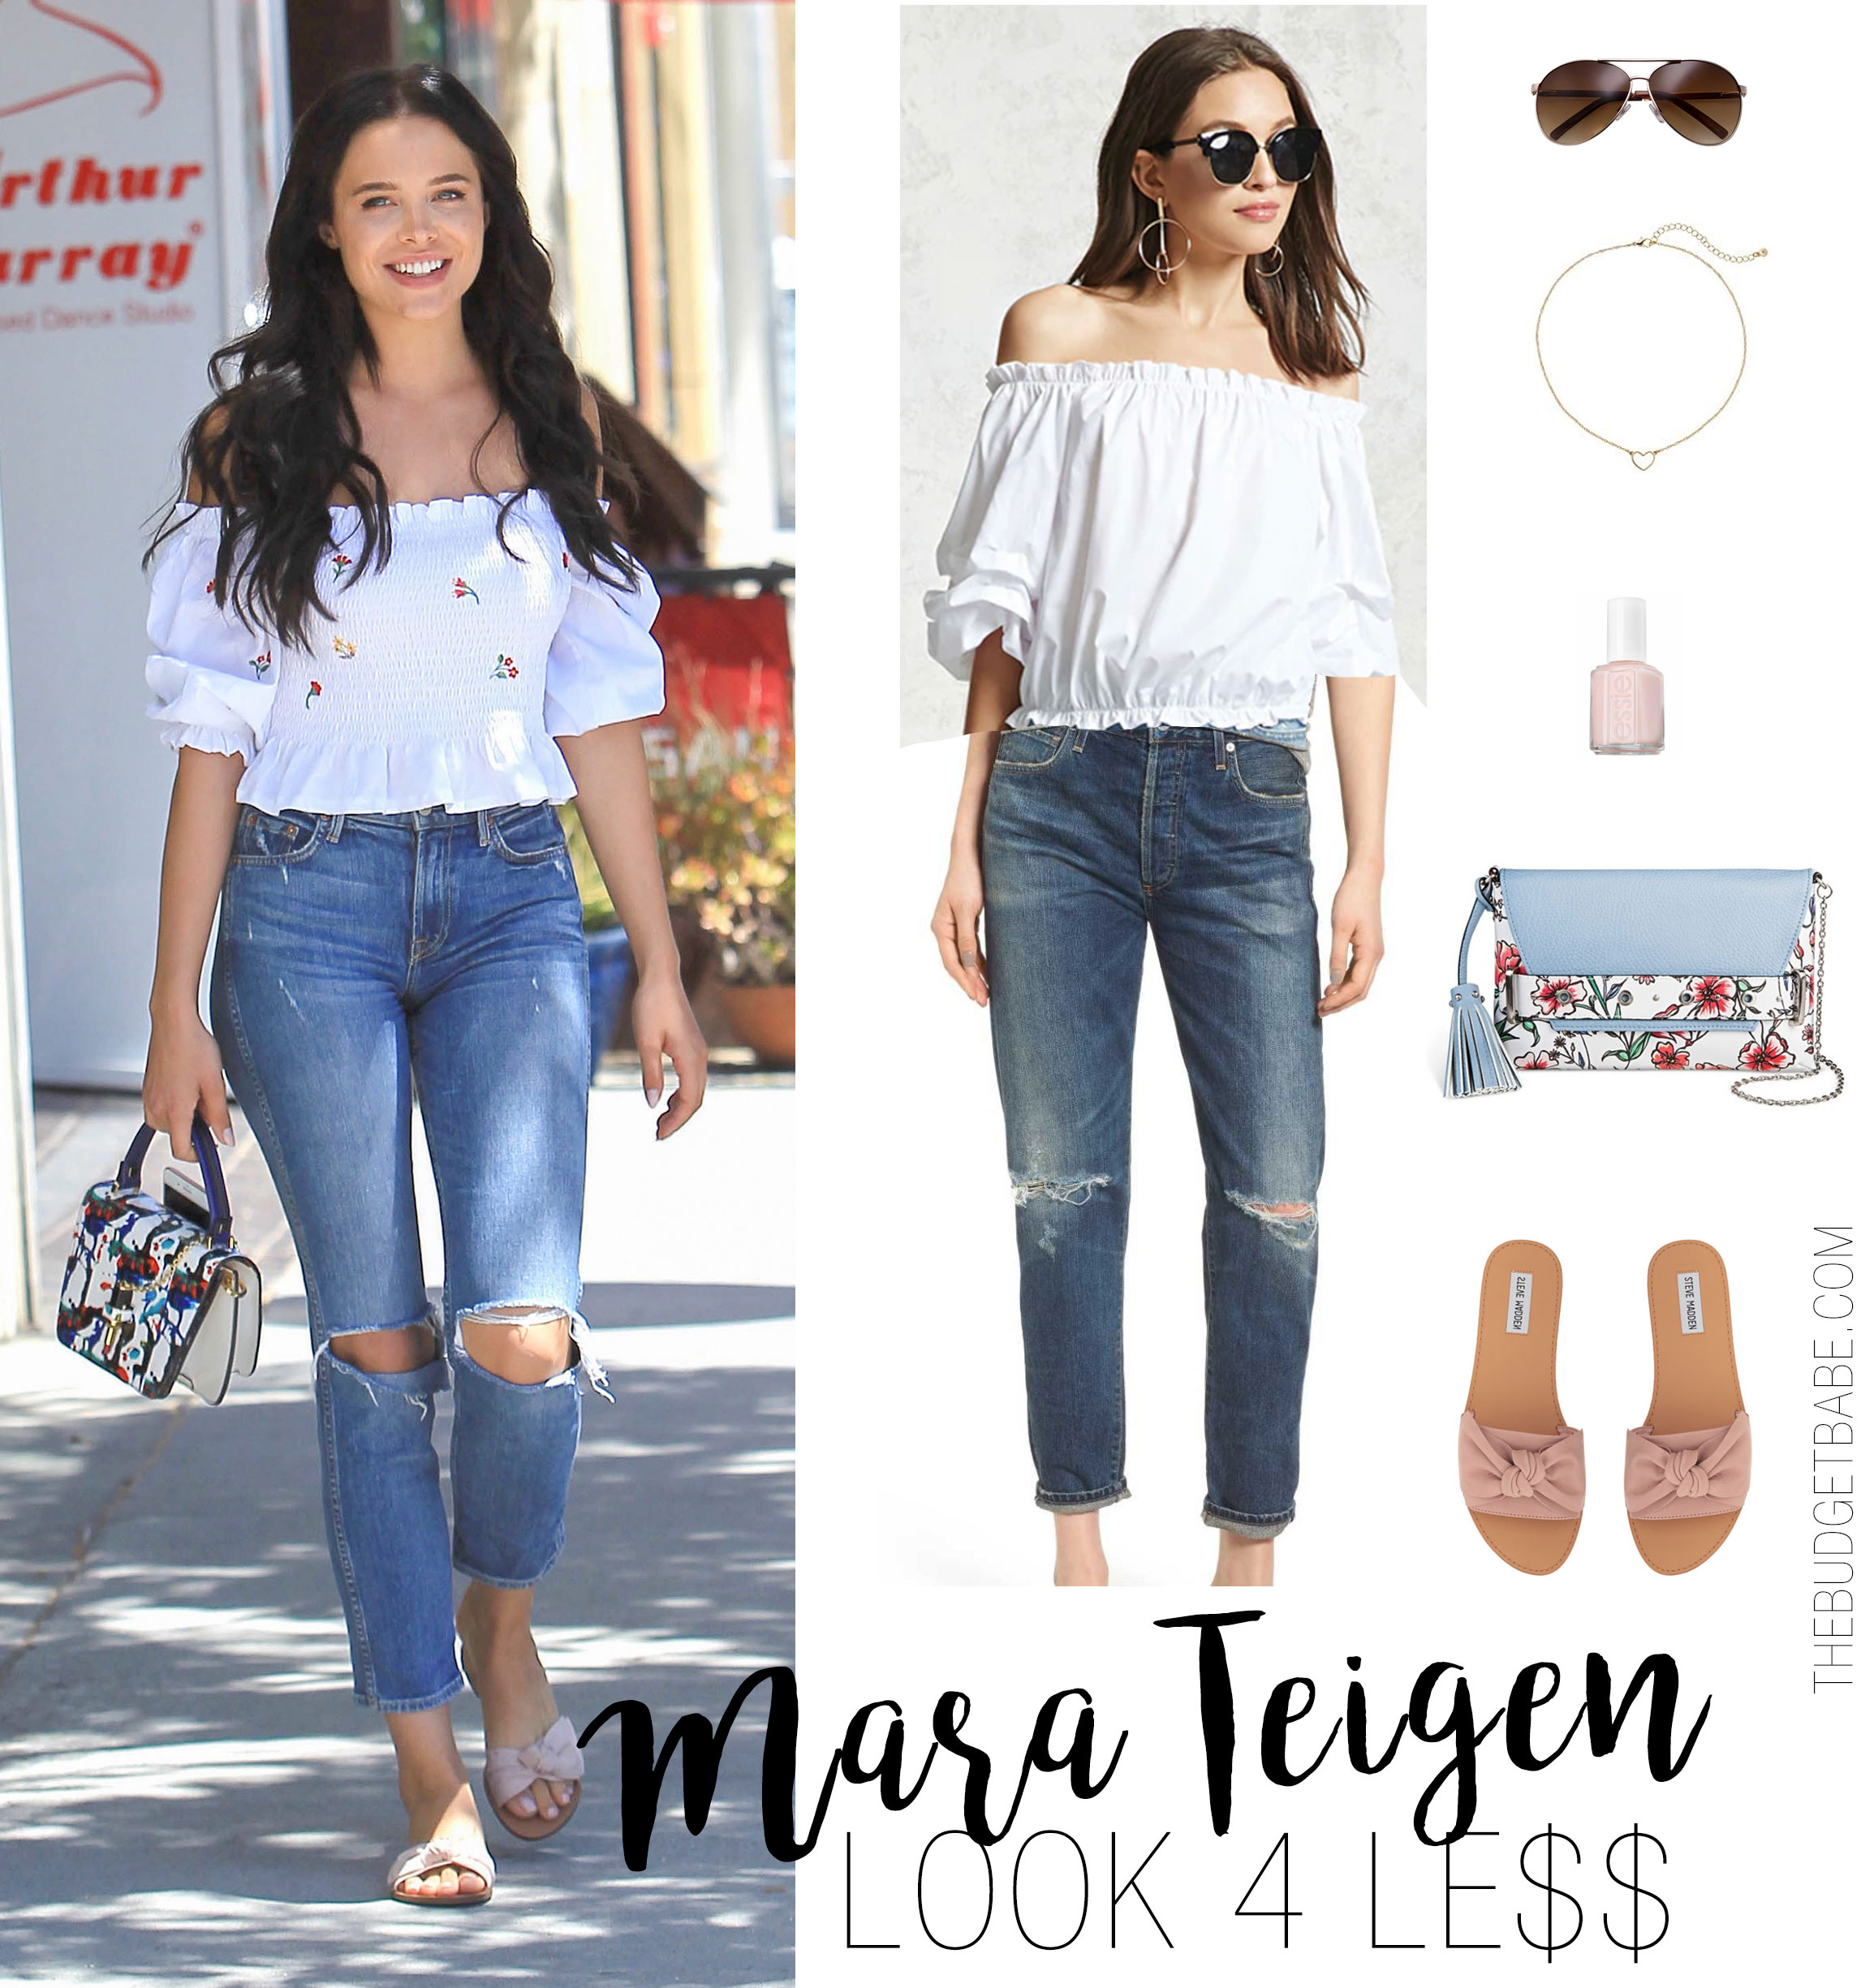 How to style an off-the-shoulder top for summer